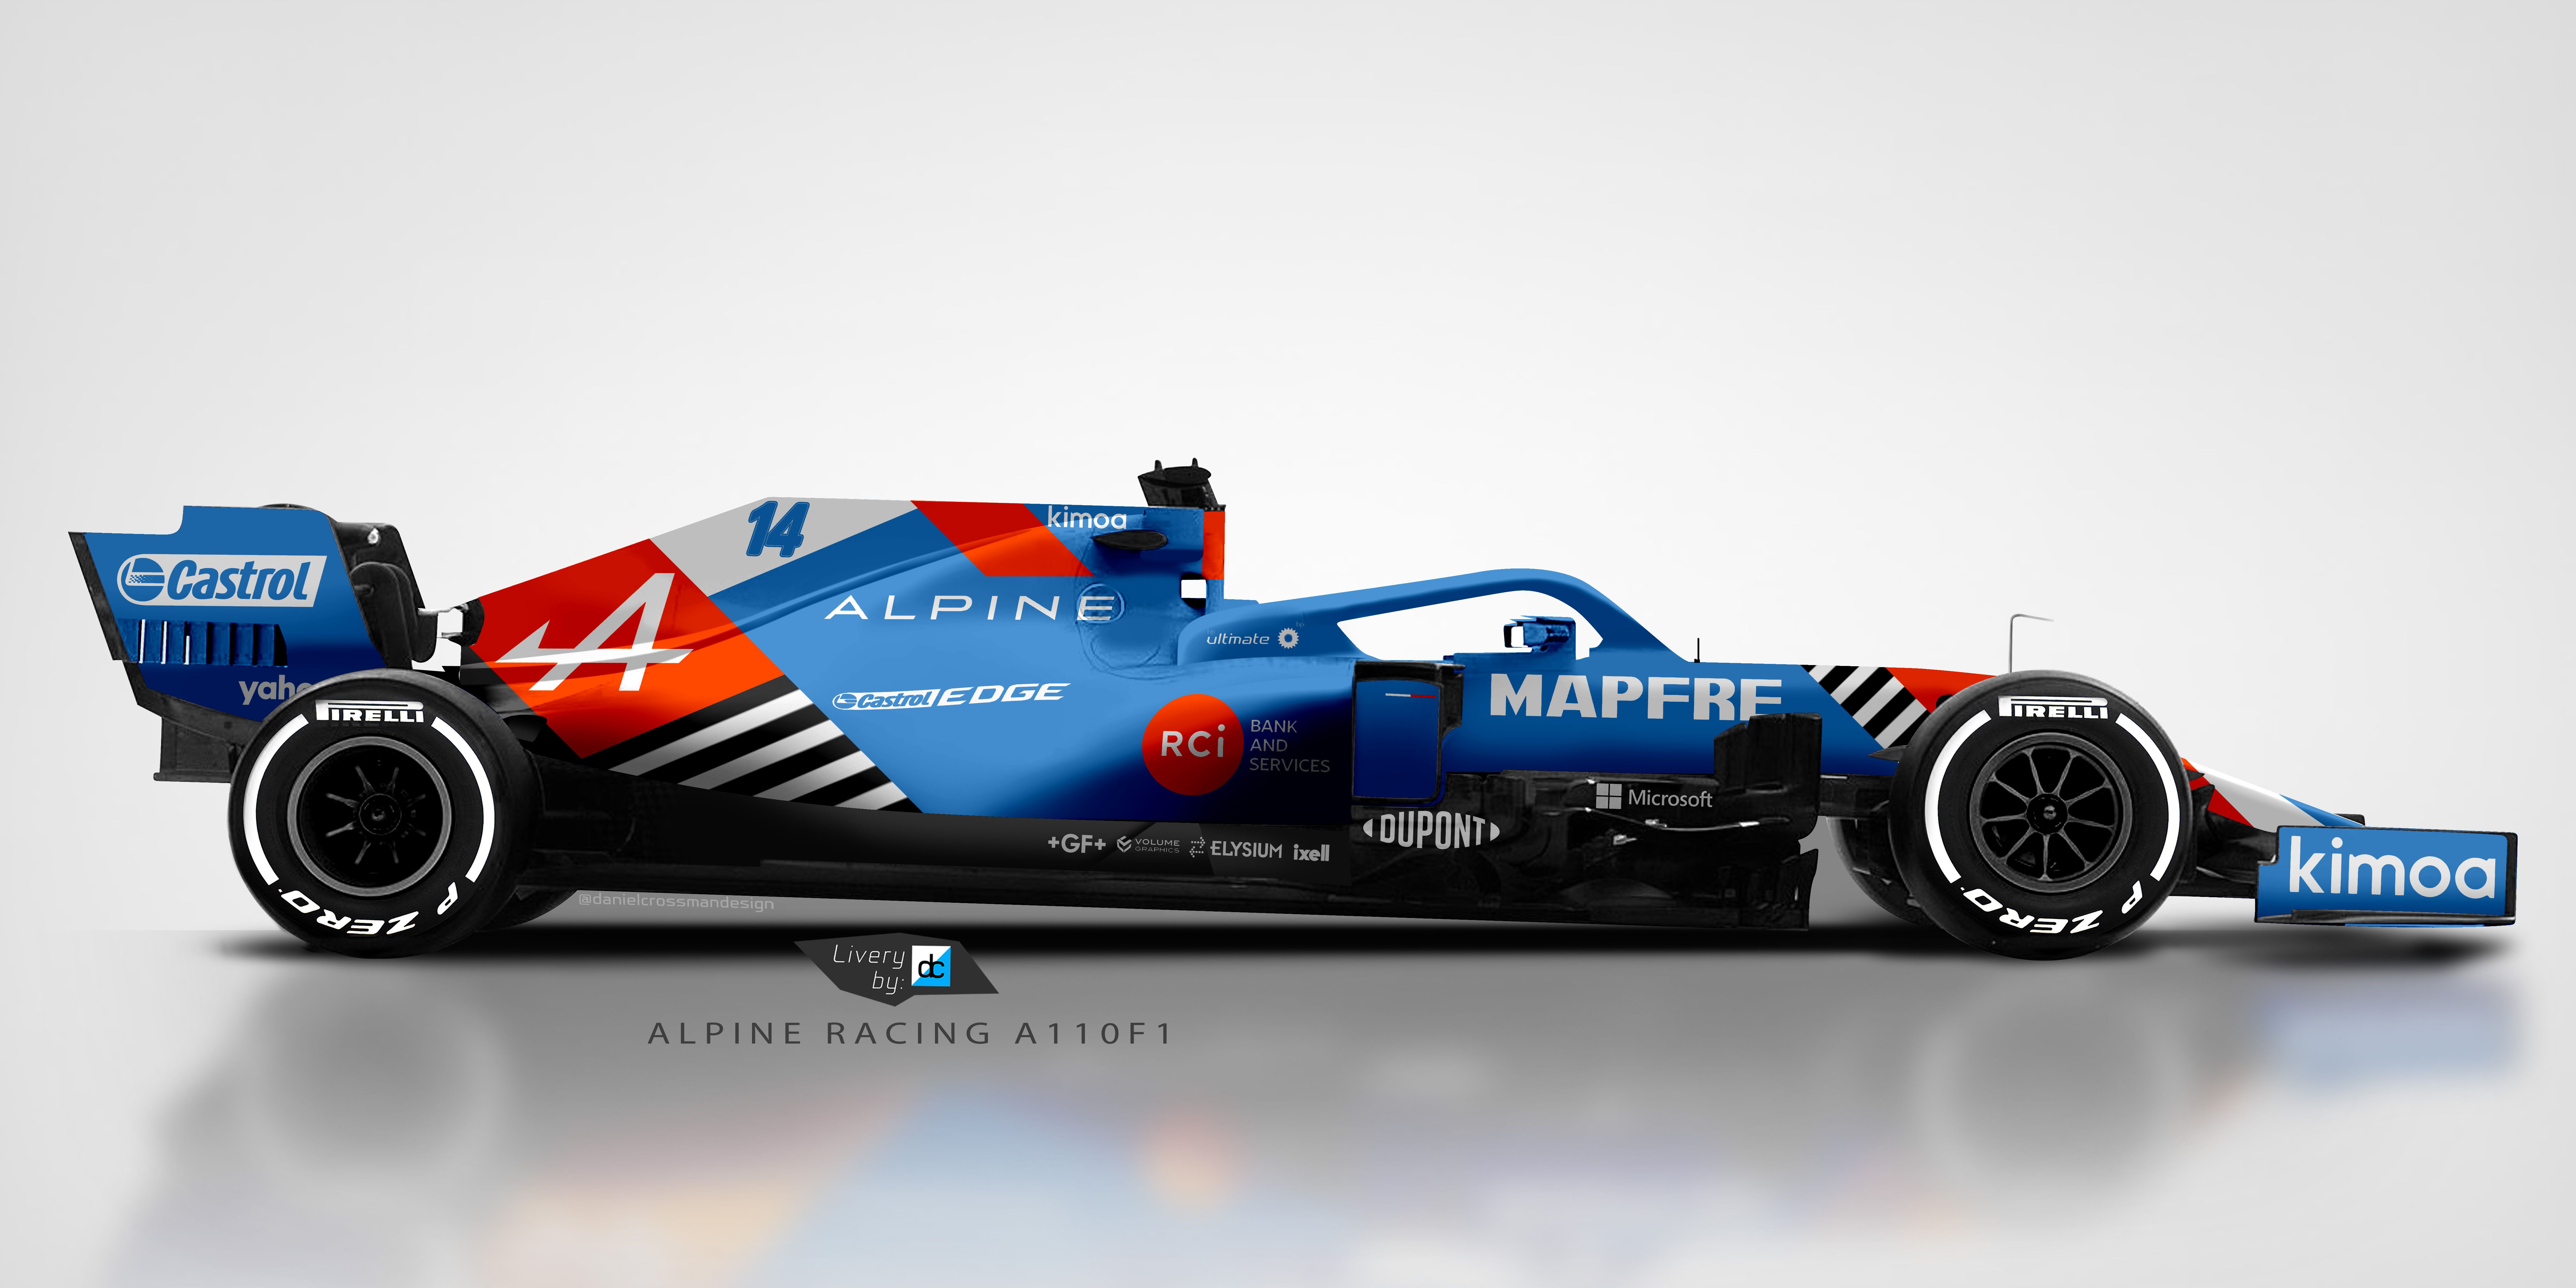 Formula 1 projects. Photo, videos, logos, illustrations and branding